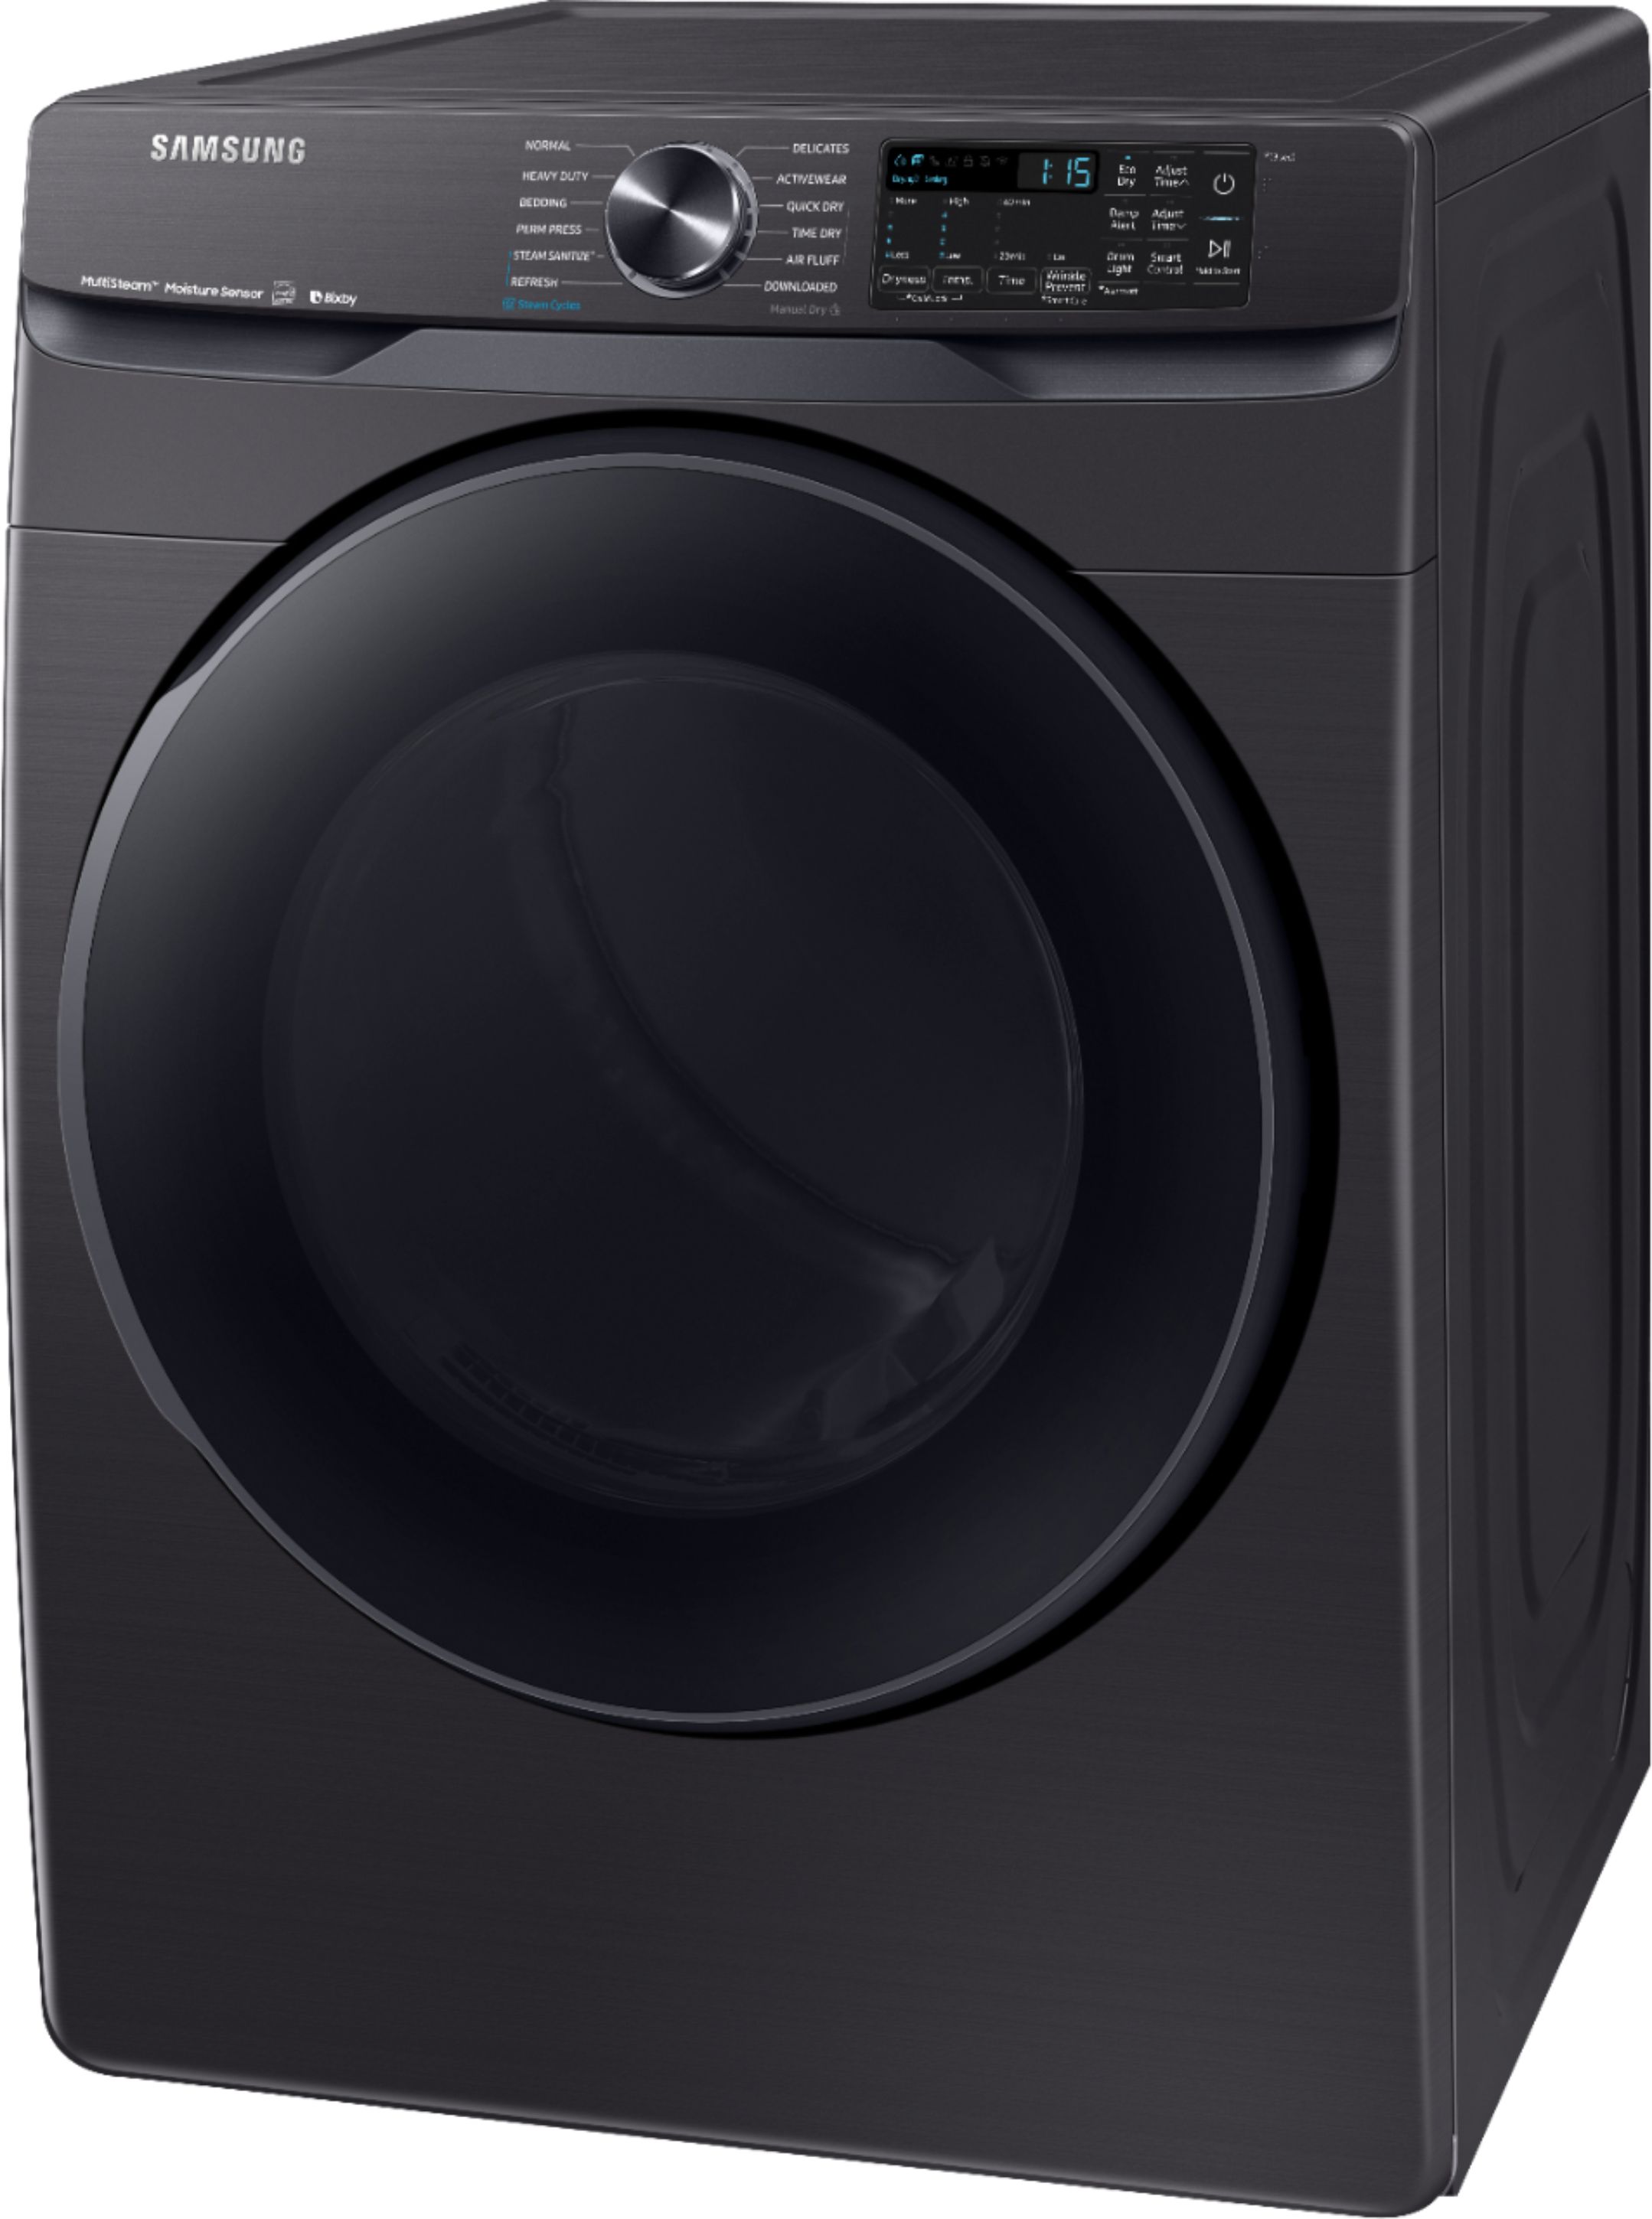 Samsung 7 5 Cu Ft Stackable Smart Electric Dryer With Steam And Sensor Dry Black Stainless Steel Dve50r8500v Best Buy